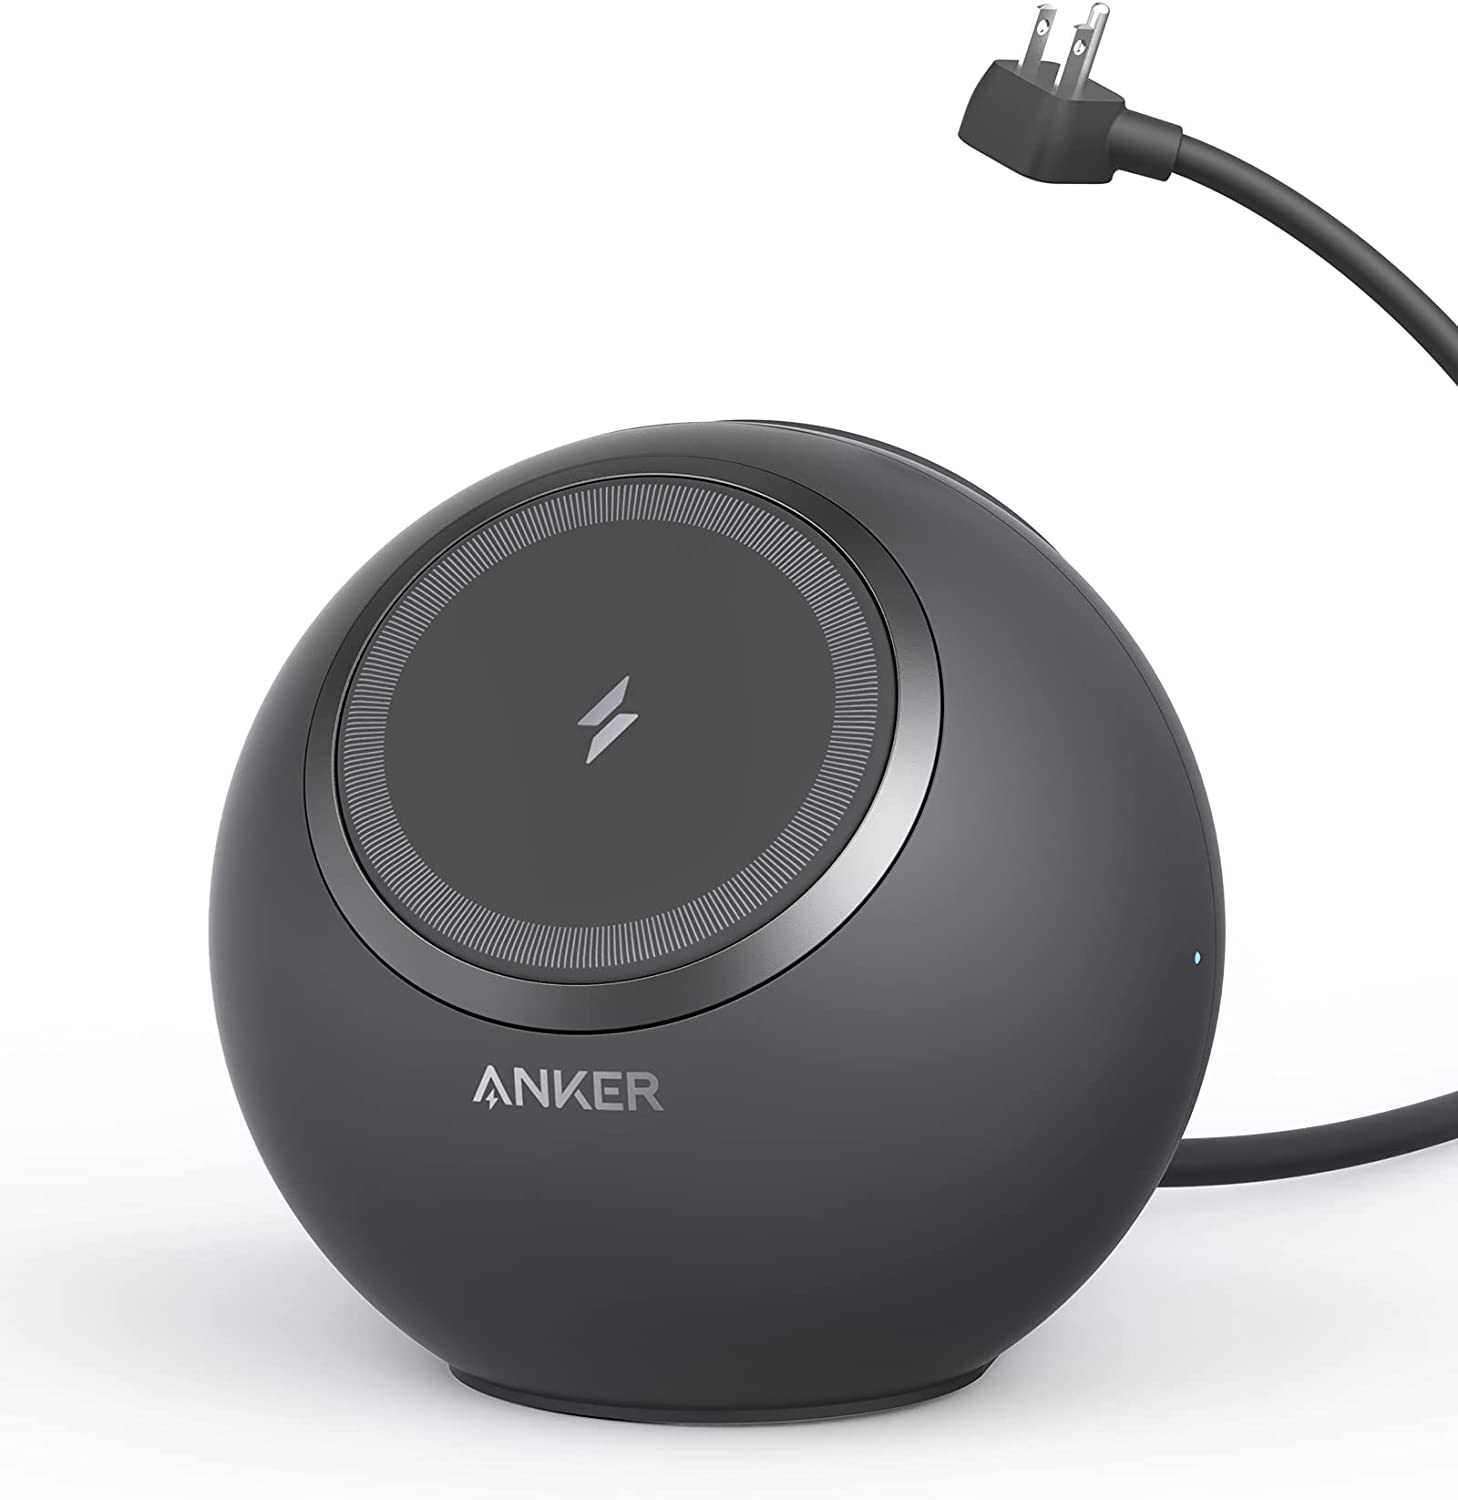 Amazon Prime Members: Anker 637 Magnetic 8-in-1 Charging Station (MagGo) $70 + Free Shipping